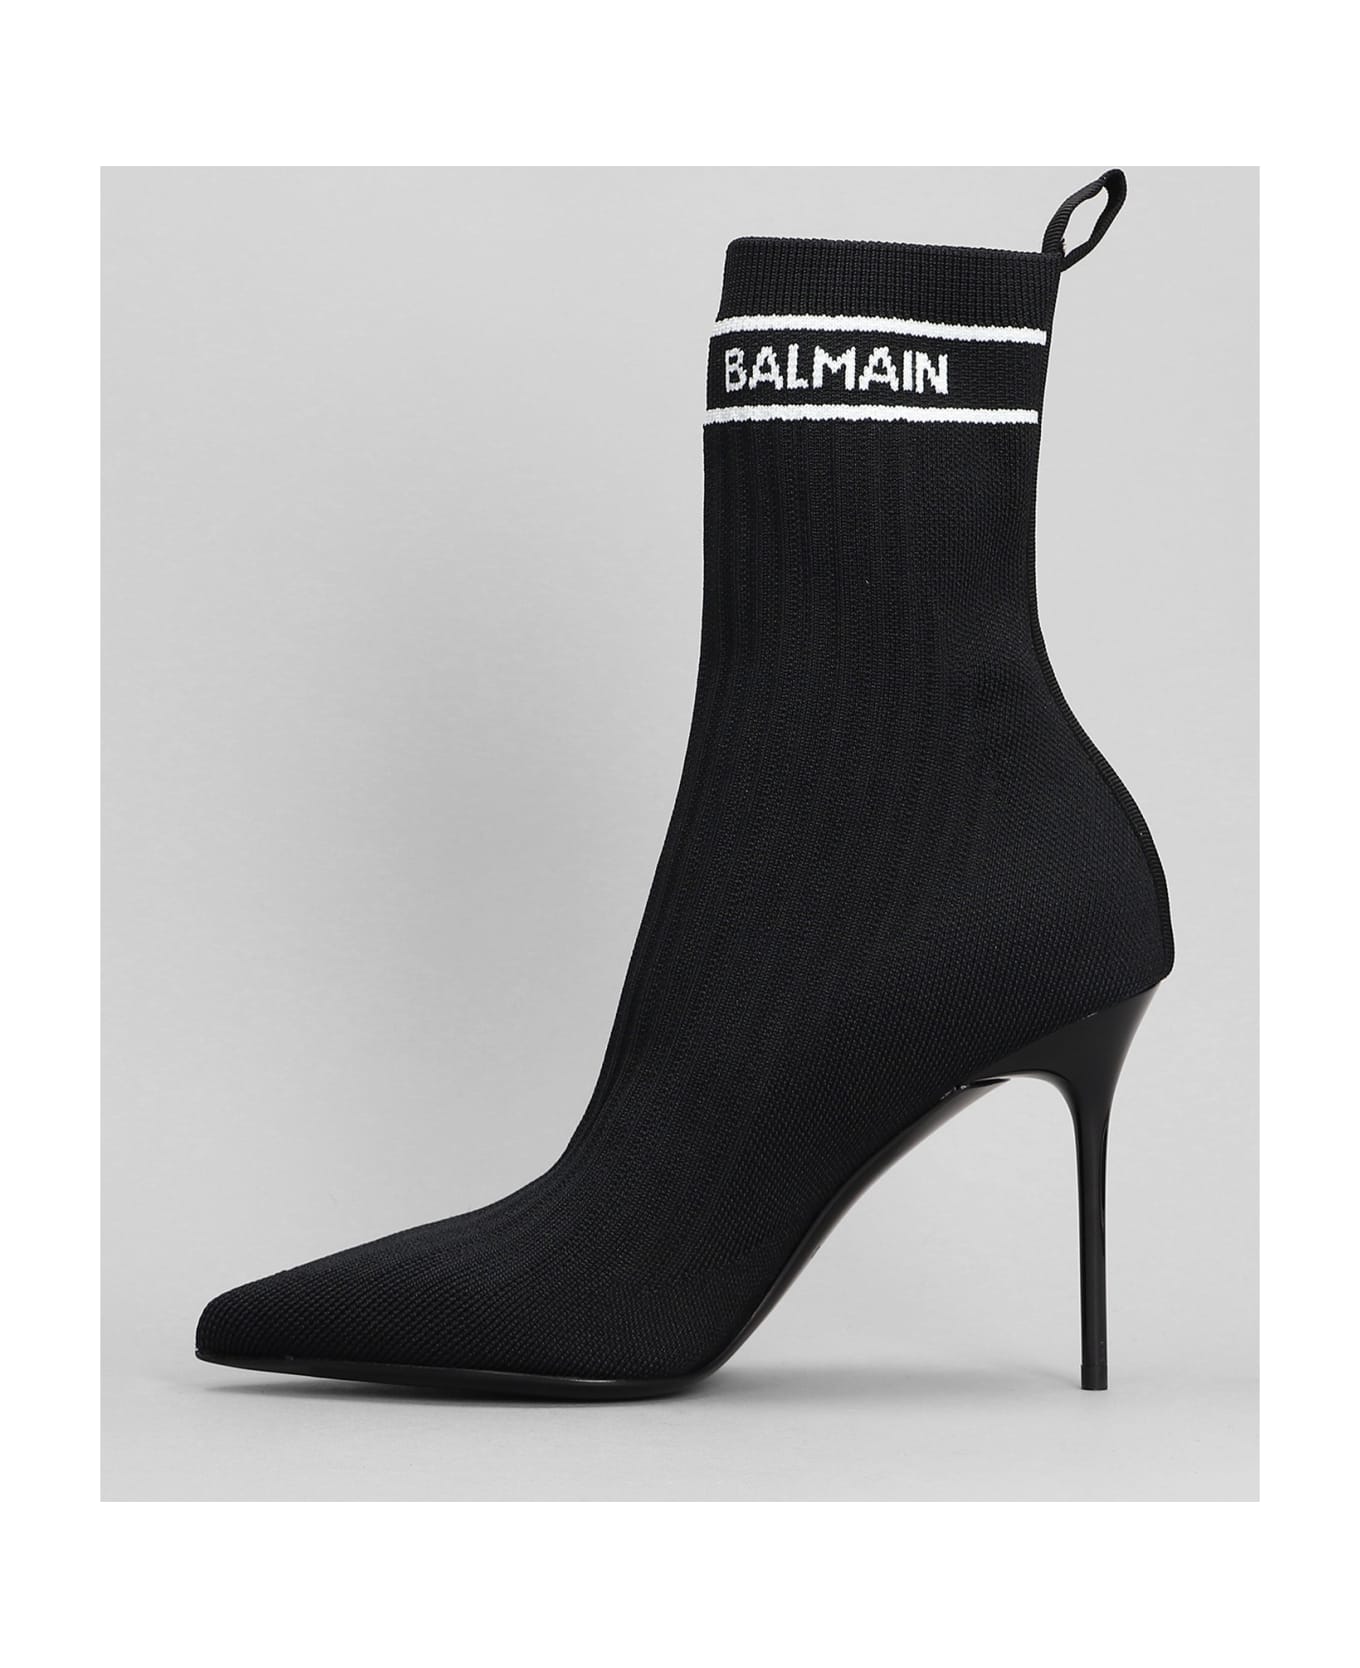 Balmain High Heels Ankle Boots In Black Polyester - black